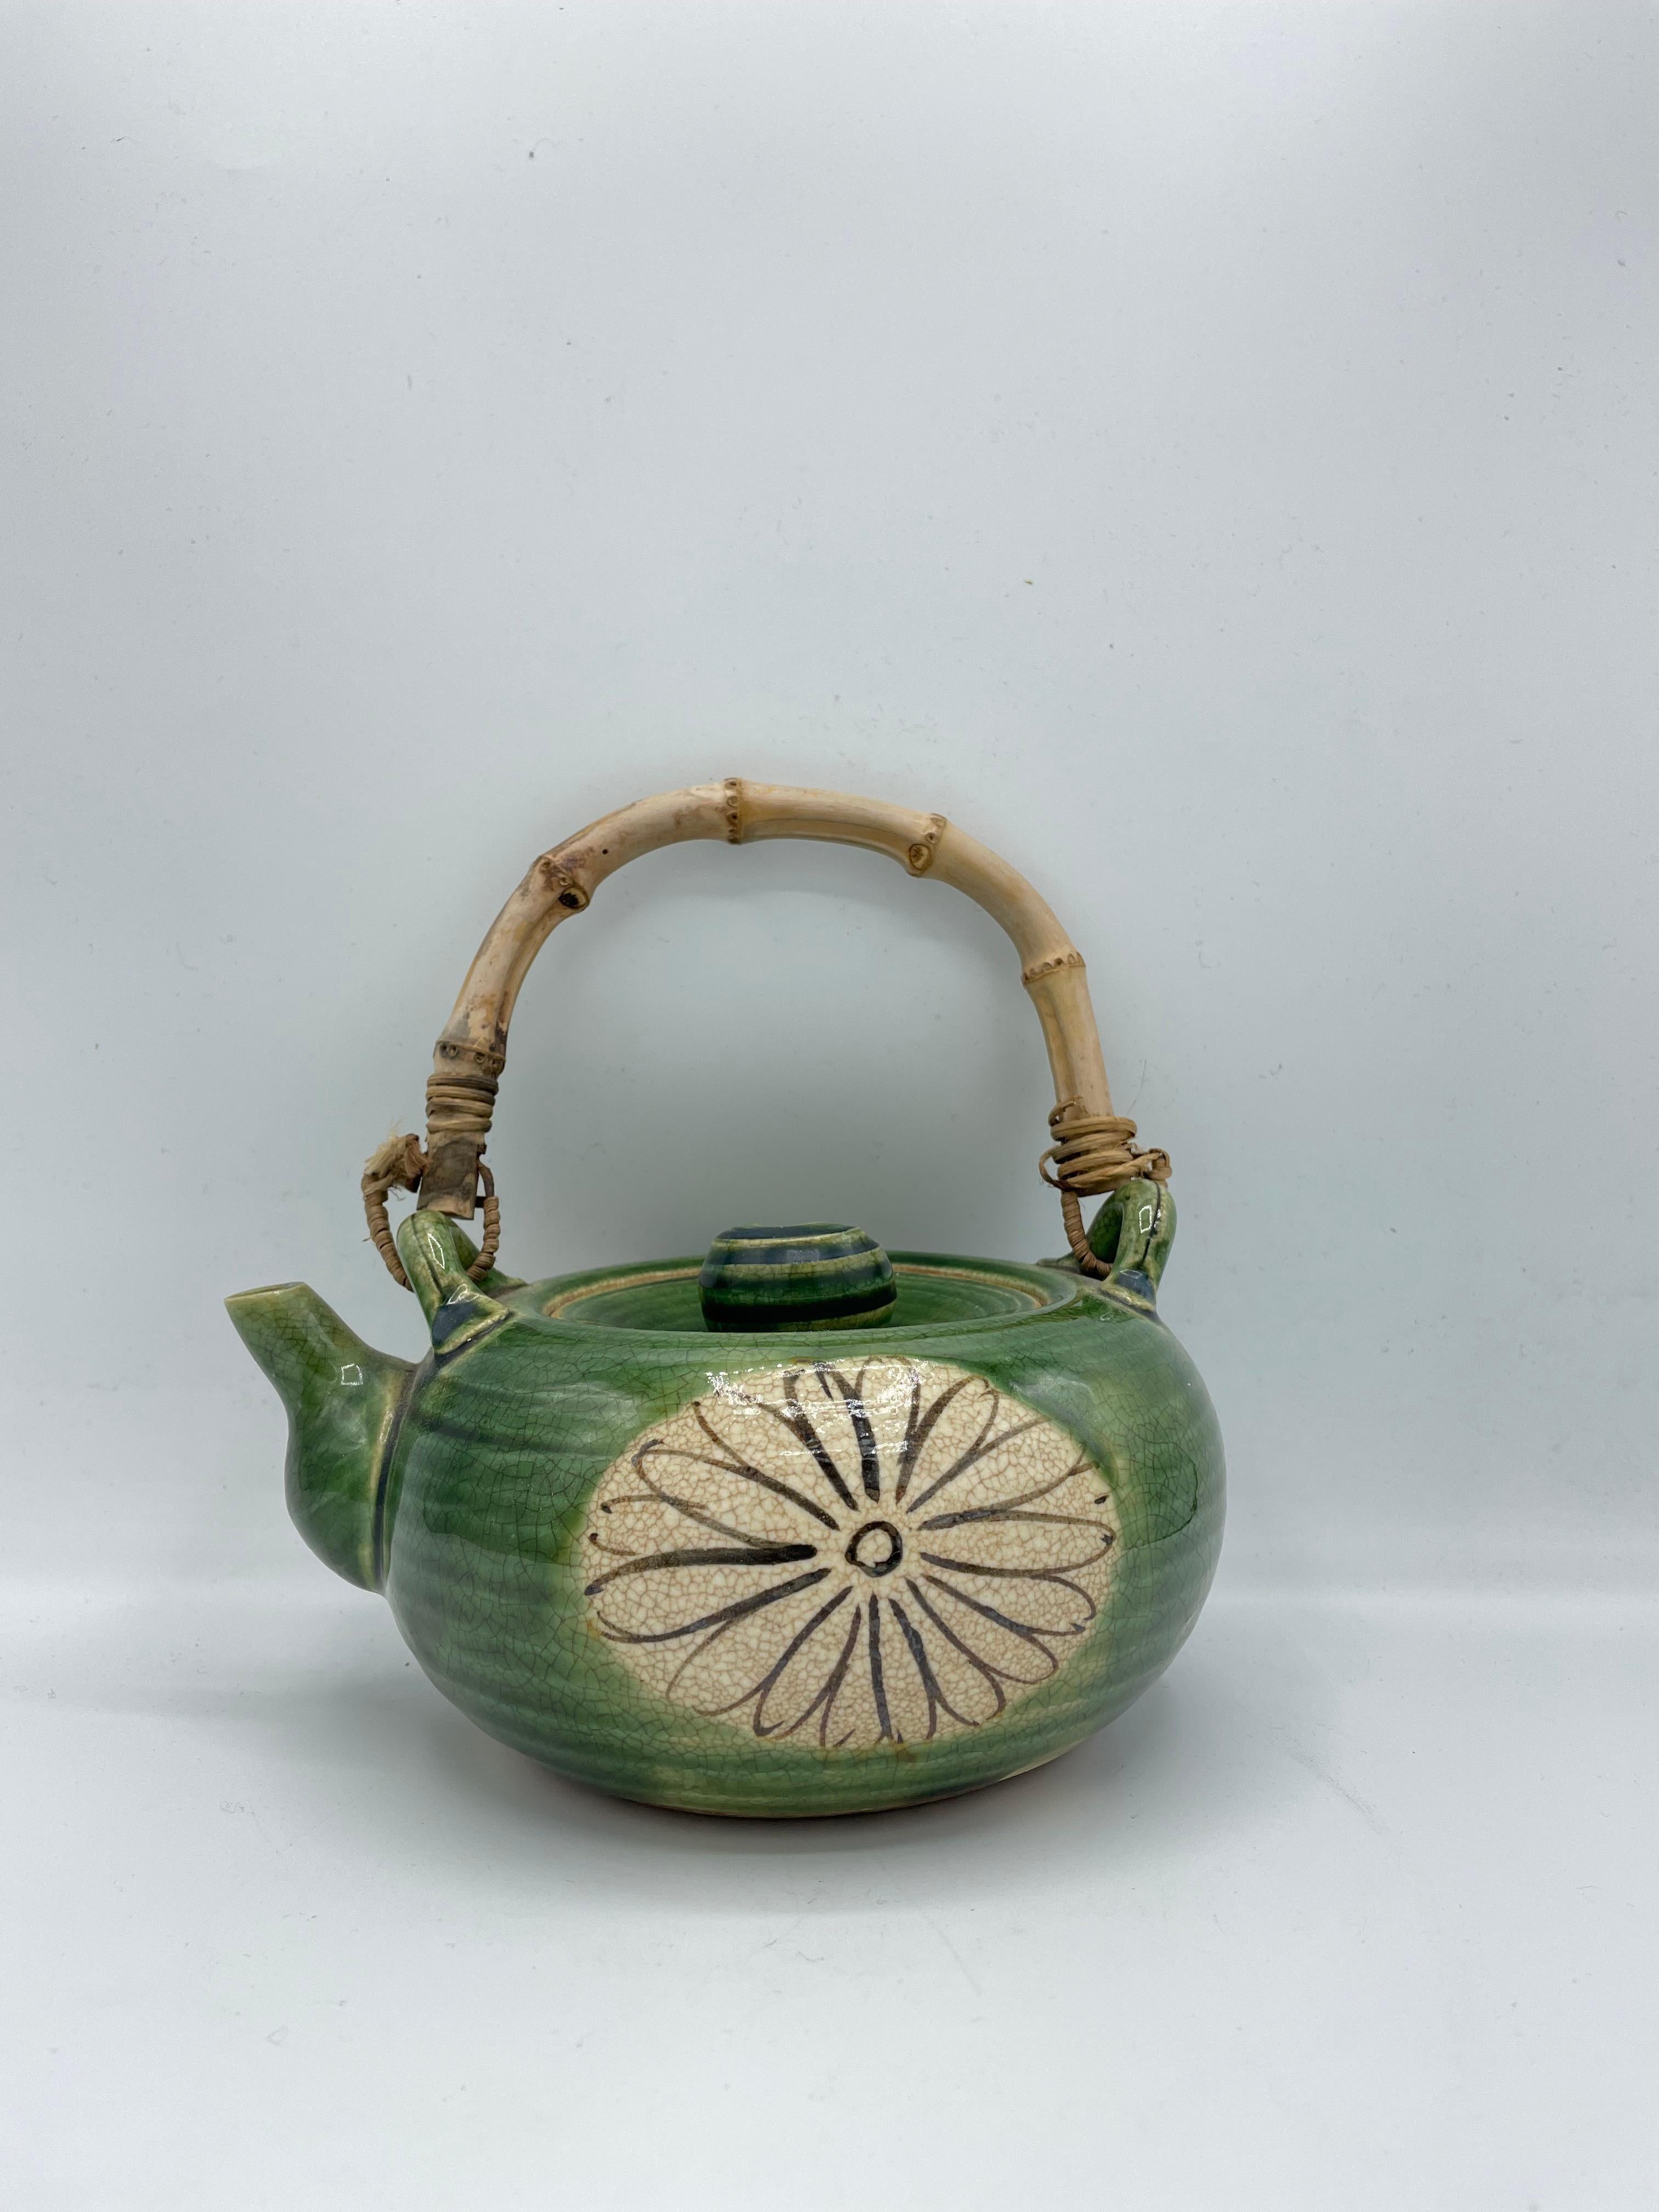 This is antique tea pot made in Japan around 1920s in Taisho era.
Taisho era is from 1912 to 1926.
This tea pot is made with style Oribe (Oribe ware/ Oribe yaki).

Dimensions: 15.5 x 18 x H19 cm (including wrist 10cm).

Oribe ware/ Oribe-yaki